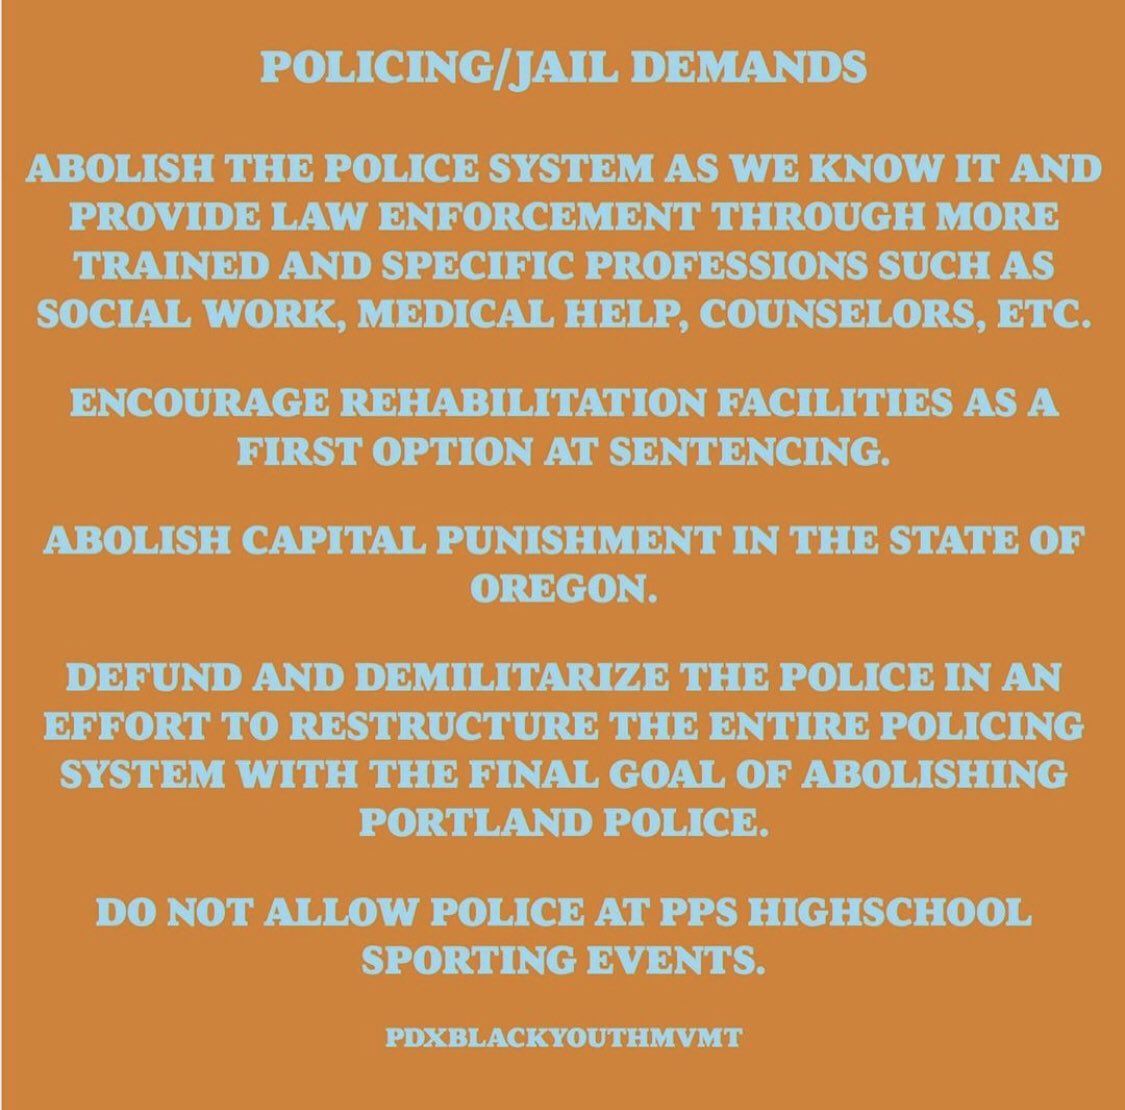 On Aug. 7, PDXBYM released these four specific sets of demands, encompassing policing and jail; healthcare; housing and property; and education. Their demands are as follows: